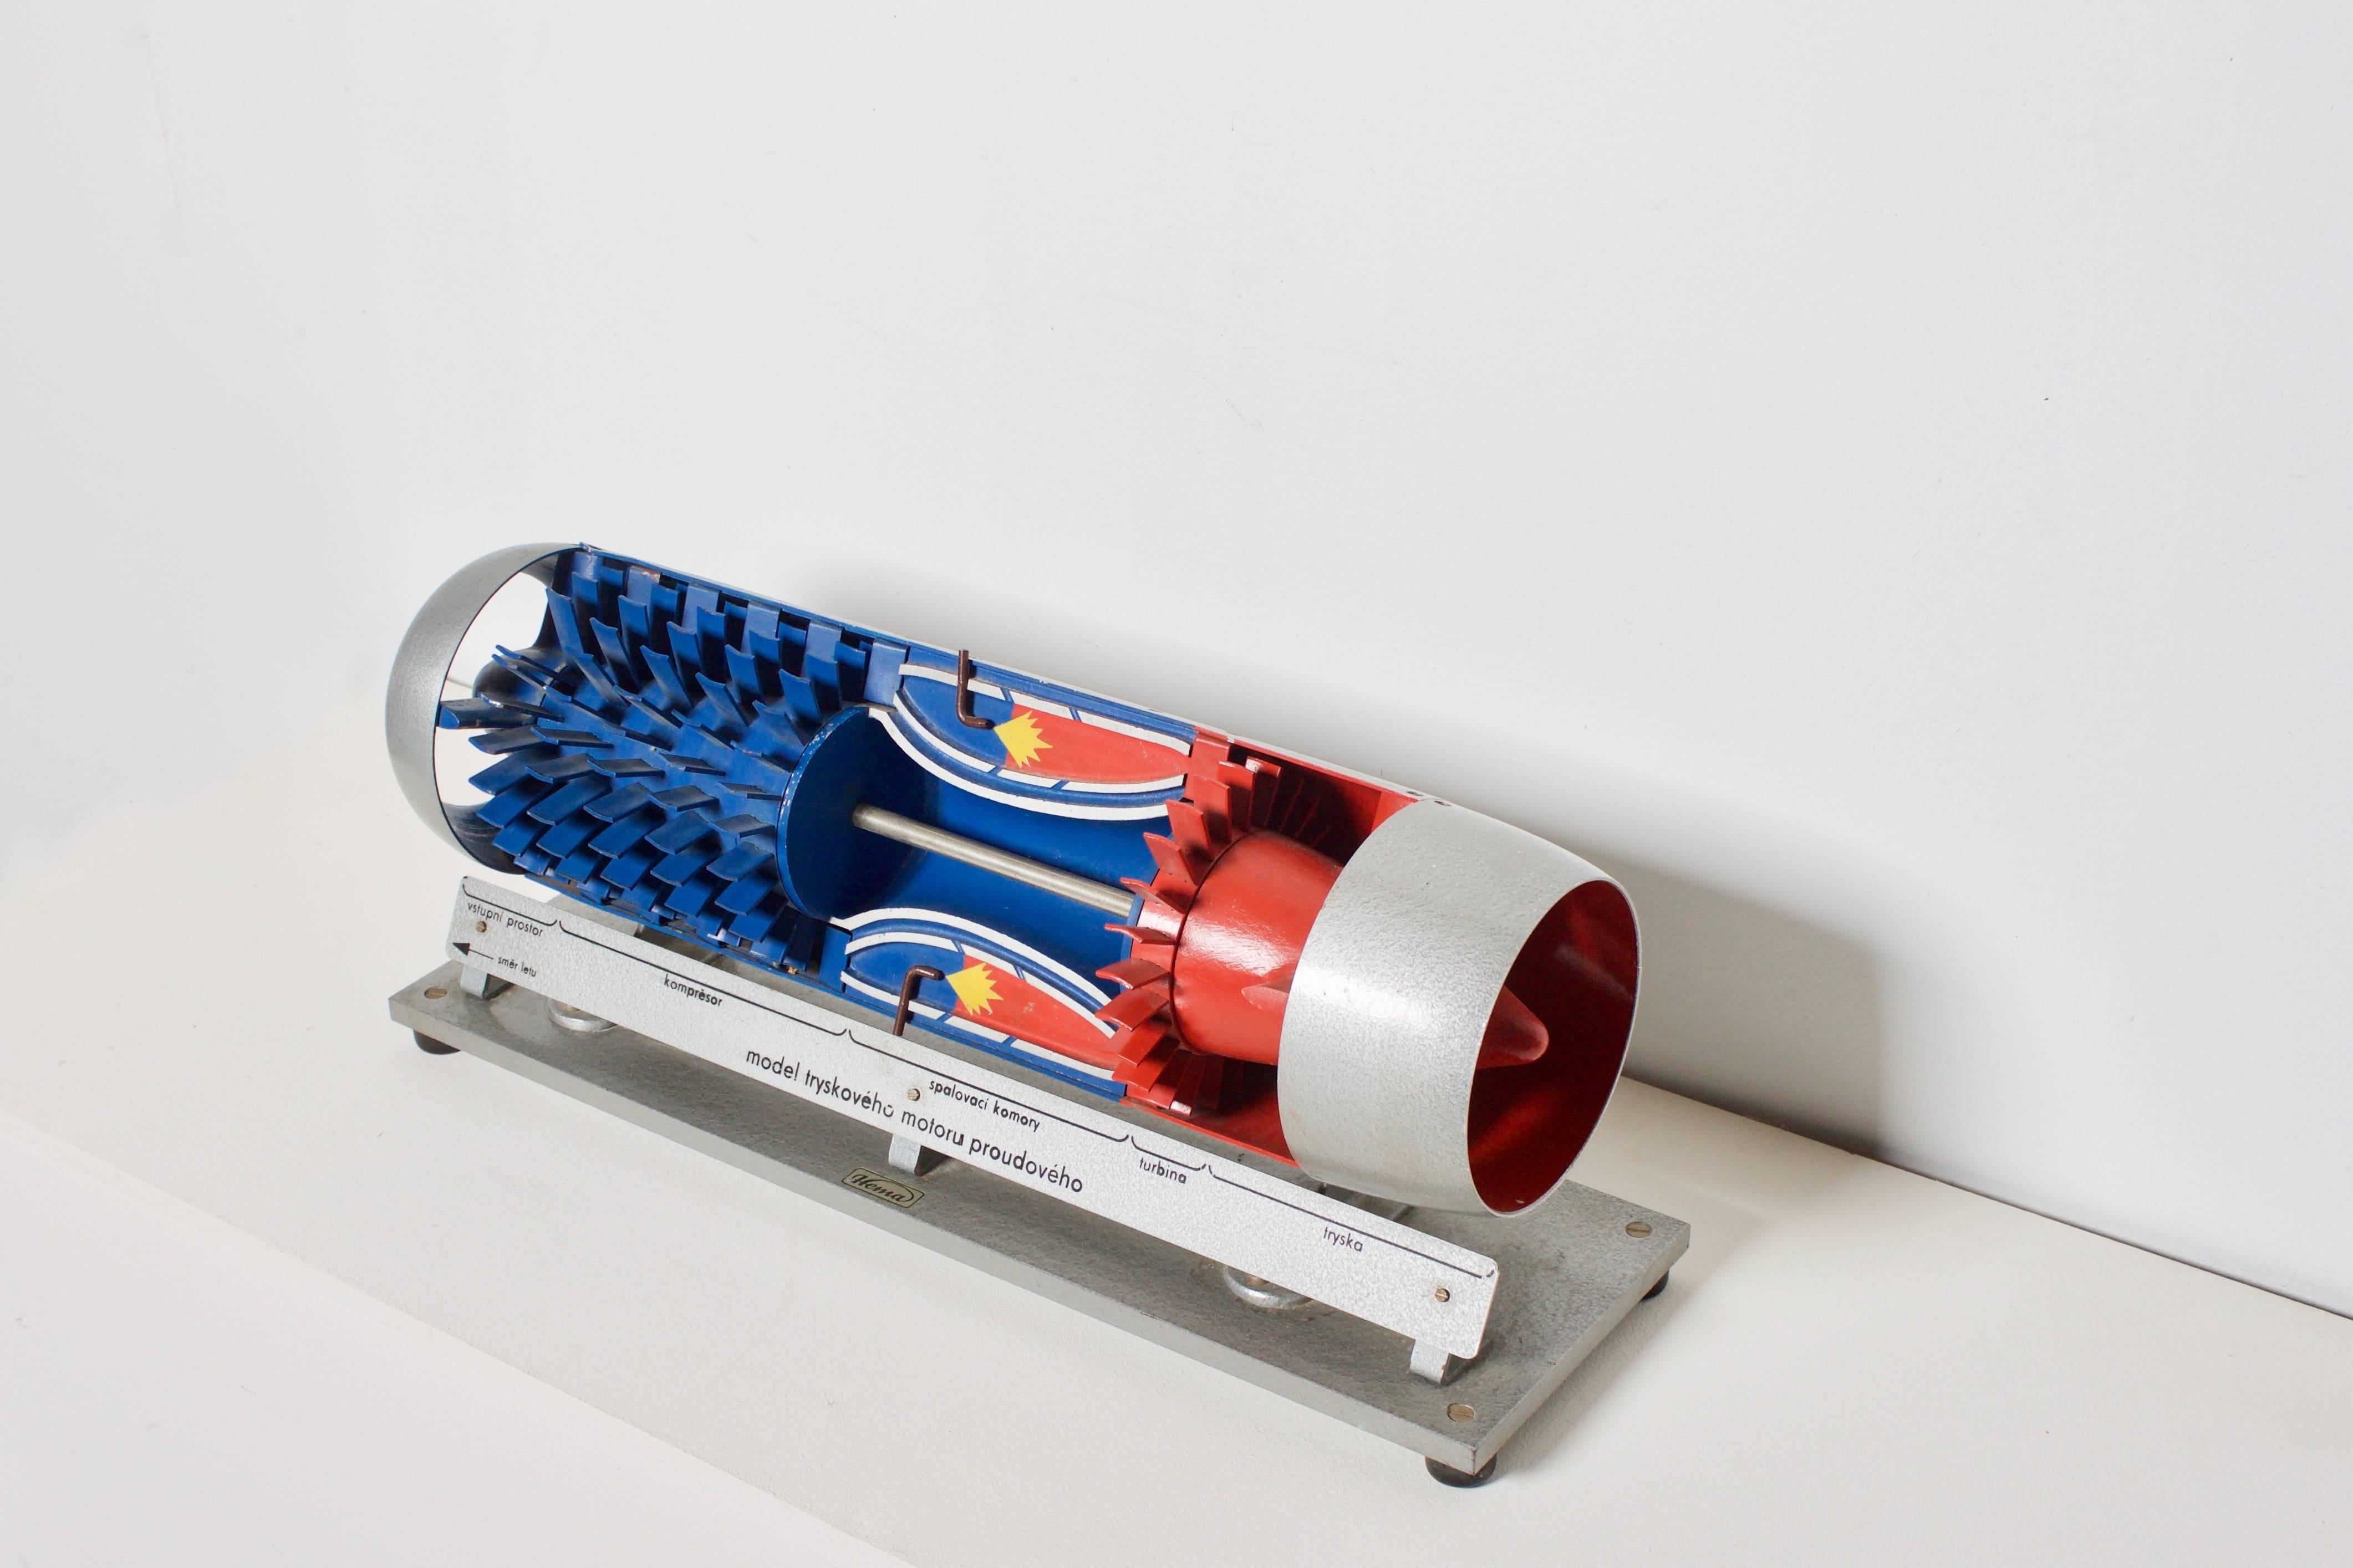 Old Russian jet engine cutaway teaching model in very good condition 

Made of solid metal, painted in grey, red and blue.

If you have any questions about our shipping options or this item please feel free to contact us.